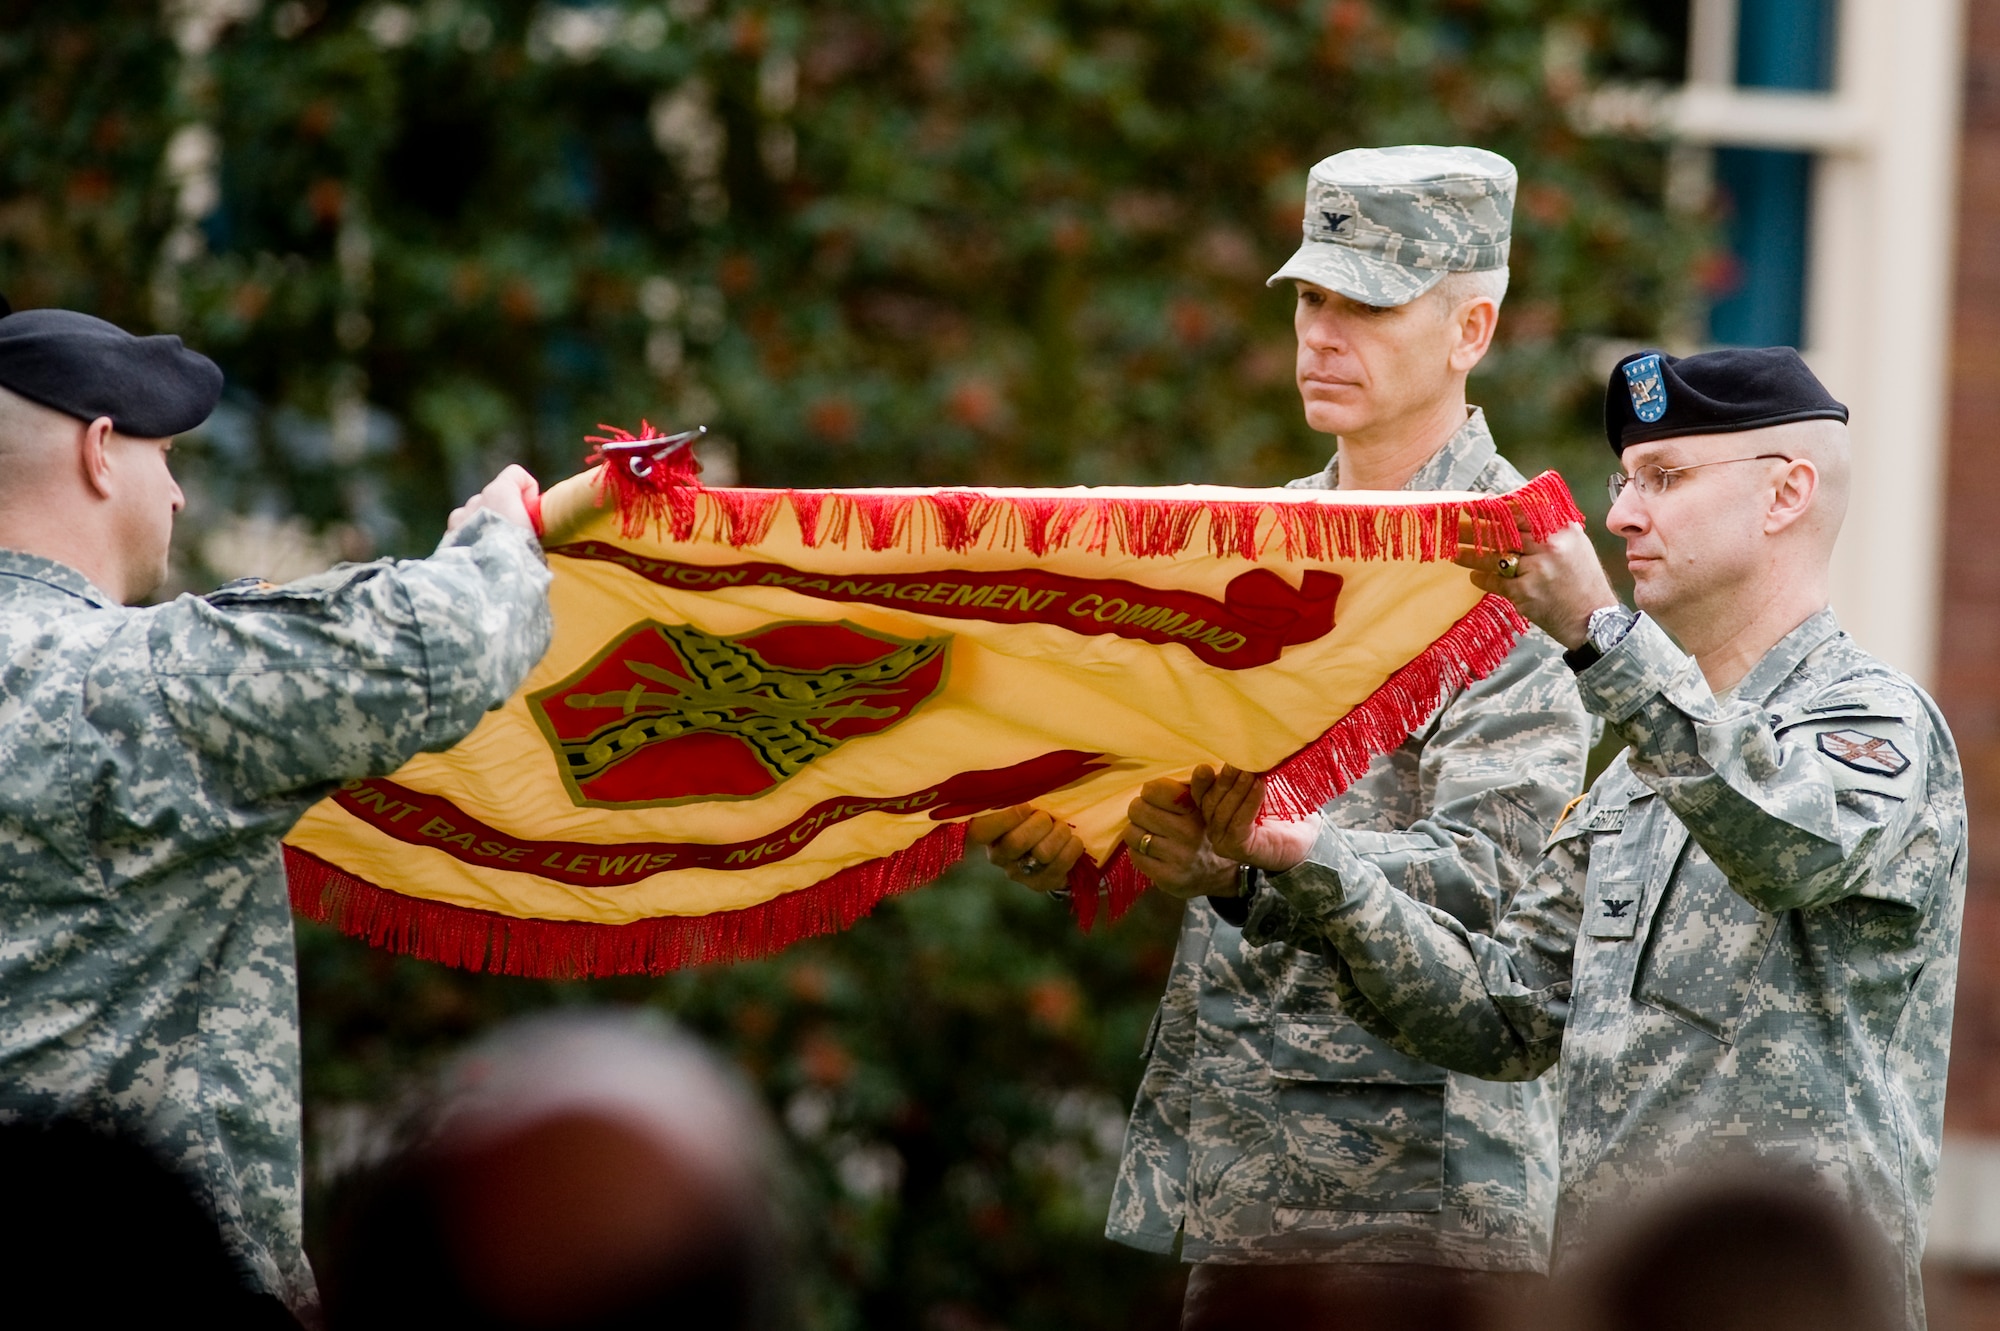 Army Col. Thomas H. Brittain, Joint Base Lewis-McChord commander and Air Force Col. Kenny Weldon, JBLM deputy commander, uncase the JBLM colors during the Initial Operational Capability ceremony in front of JBLM Headquarters Monday. (U.S. Air Force Photo/Abner Guzman)